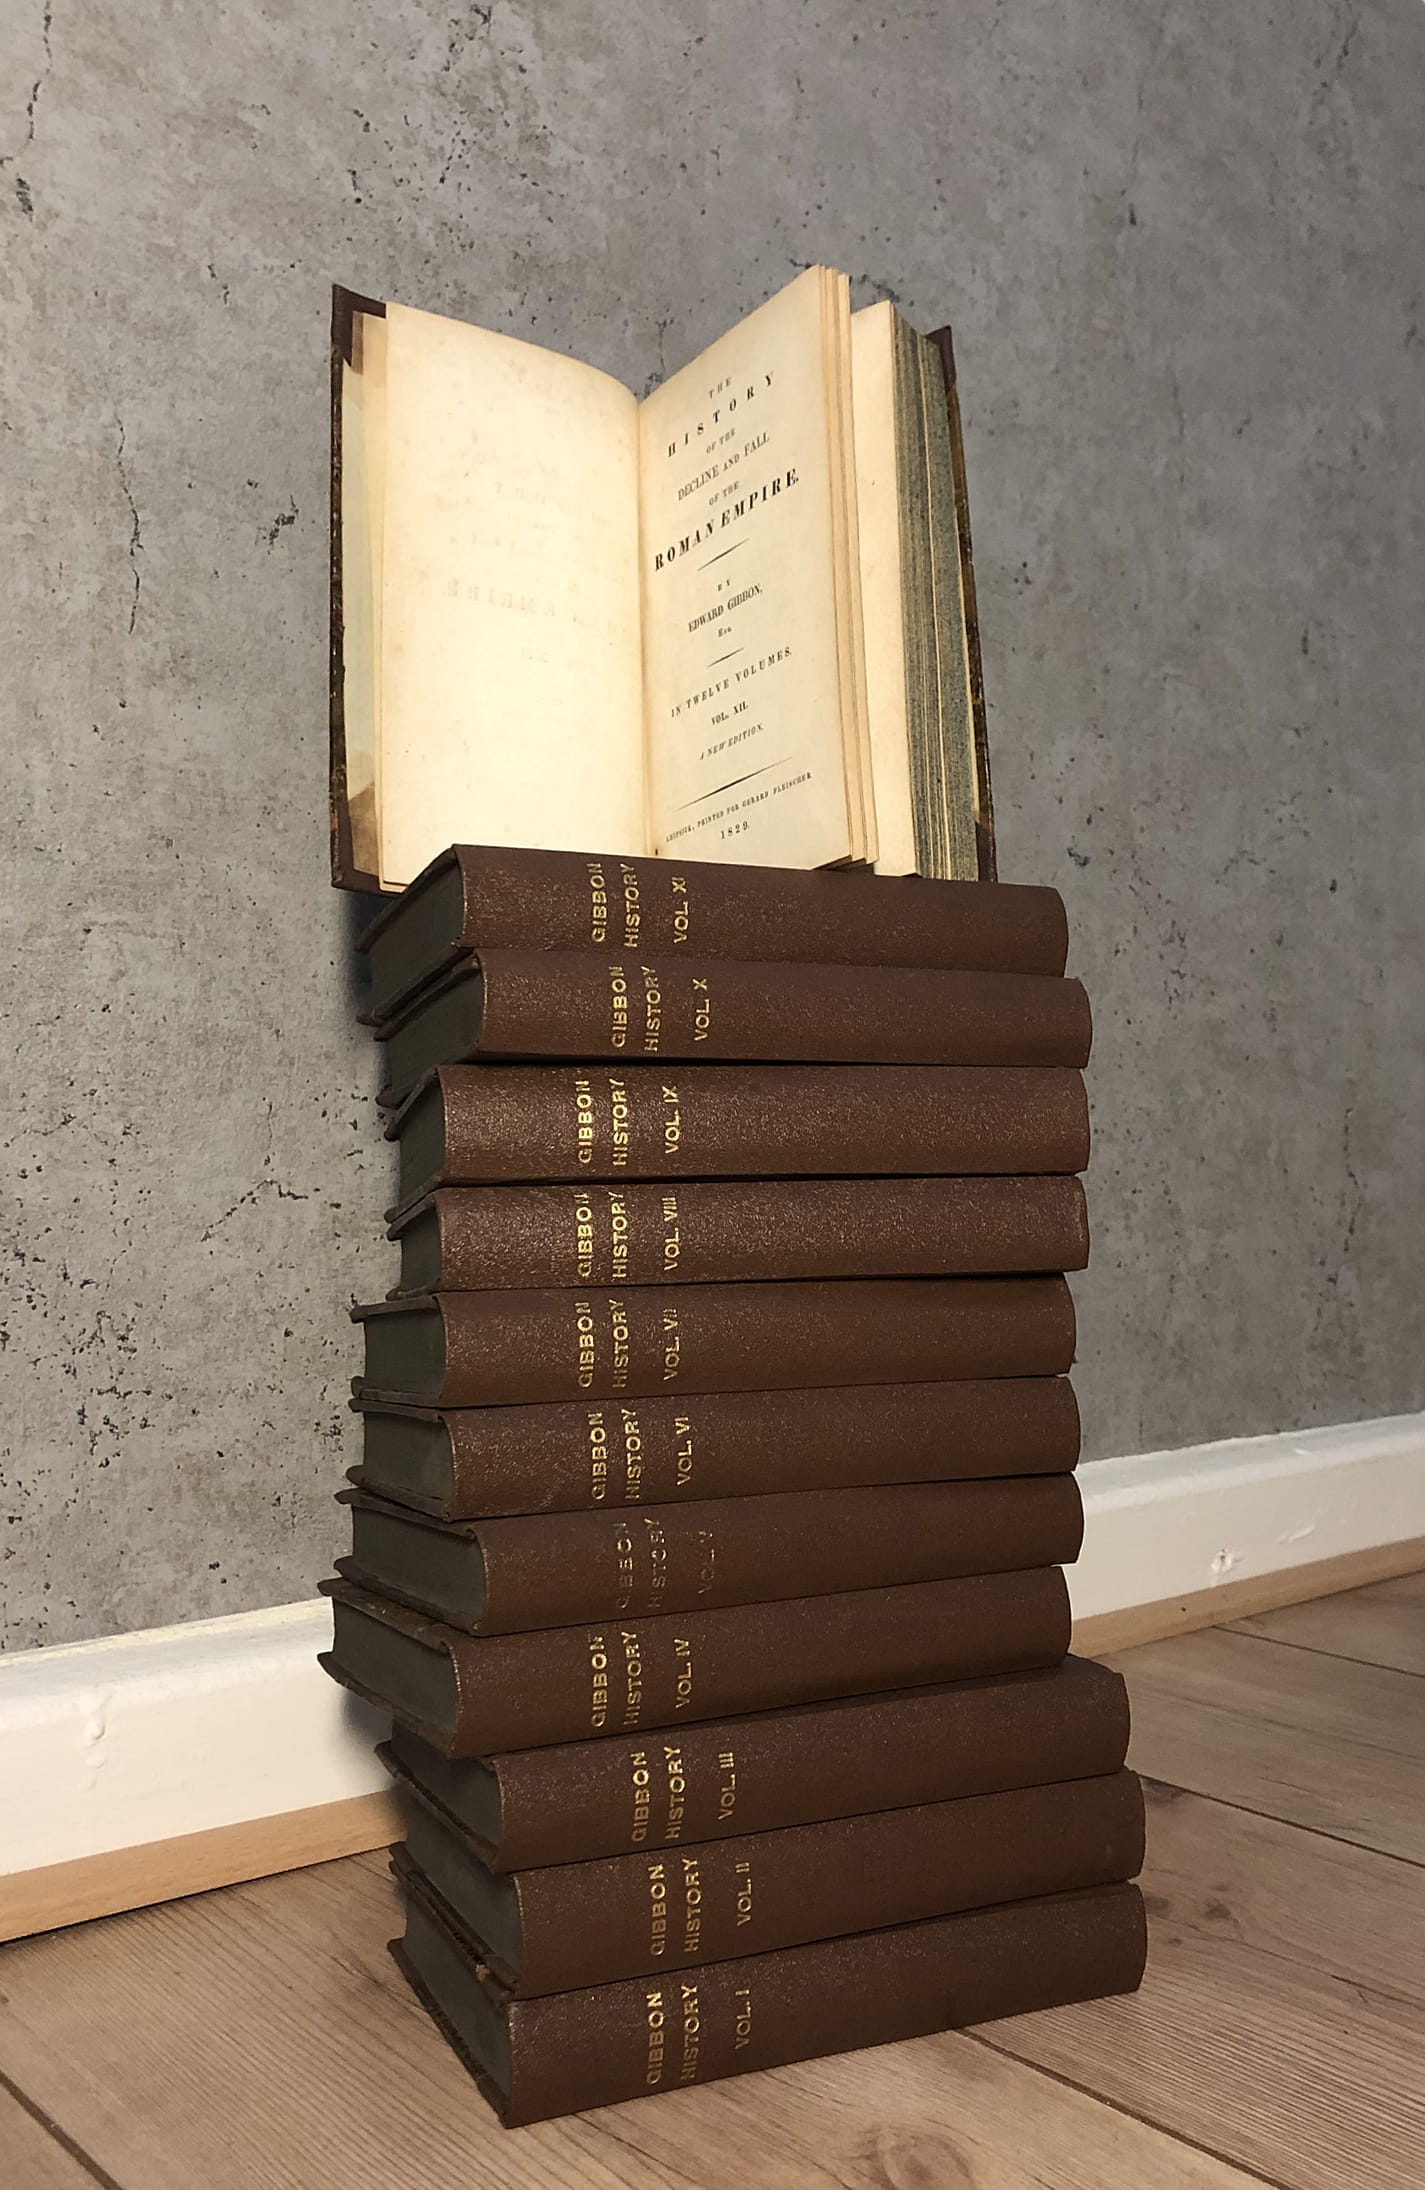 Photo: an antiquarian edition of Edward Gibbon’s “History of the Decline and Fall of the Roman Empire”.